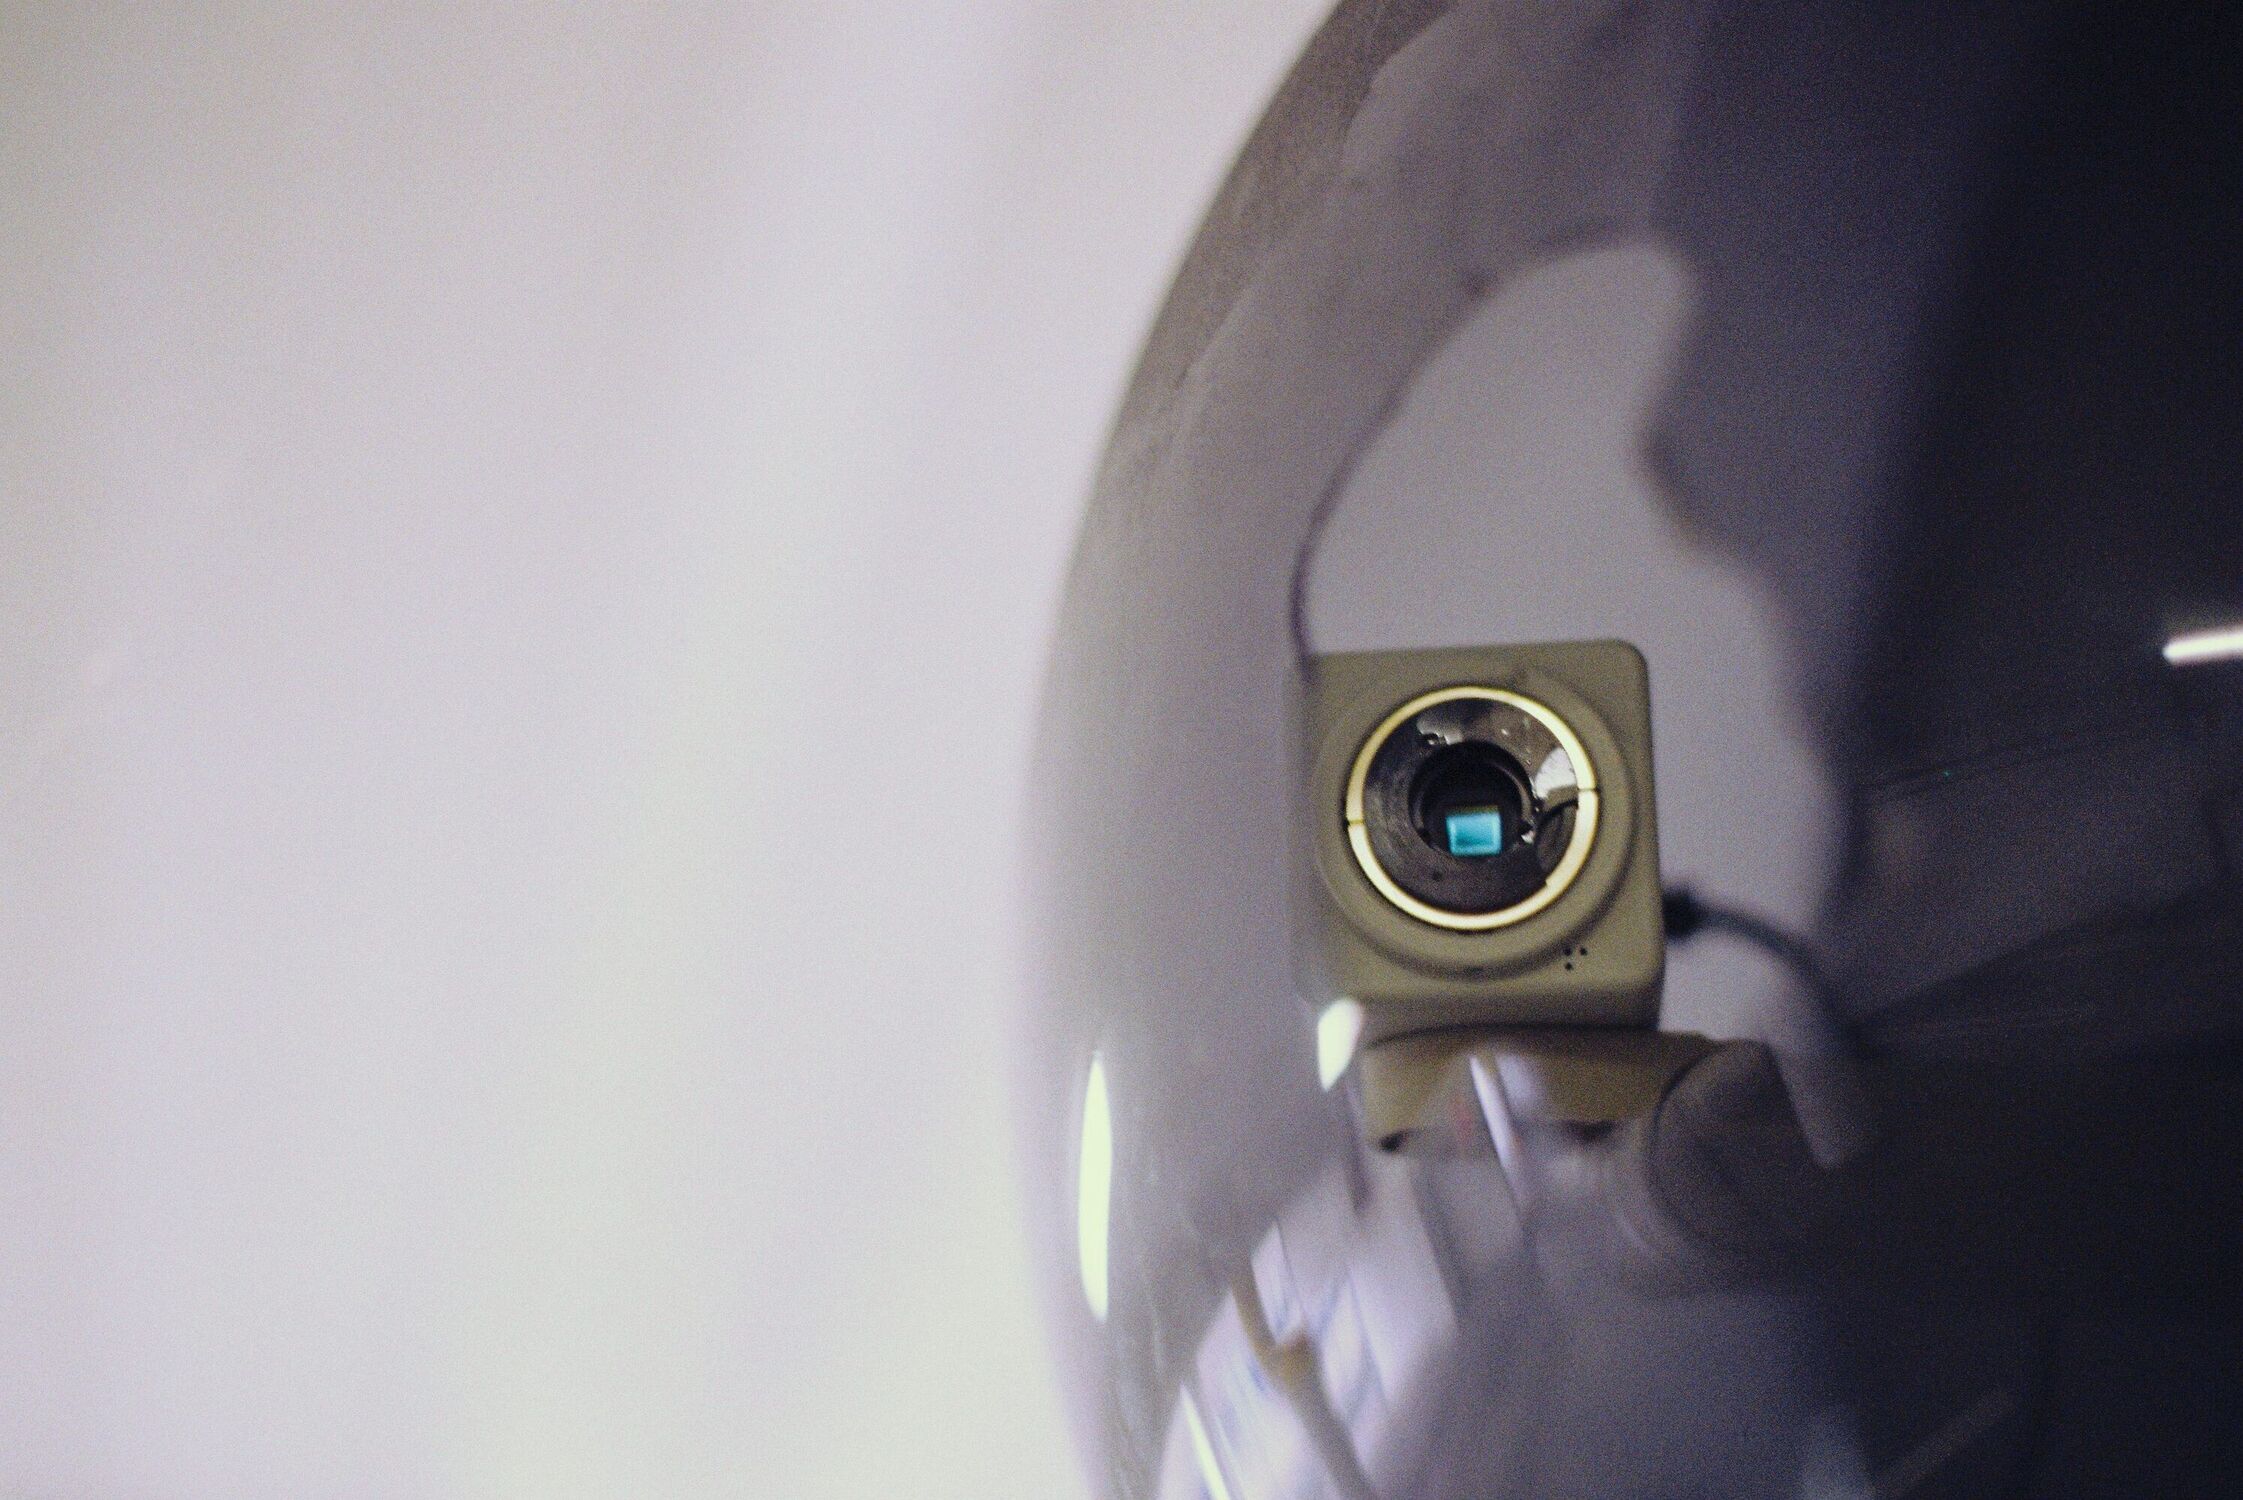 Close up of a security camera that looks directly at you